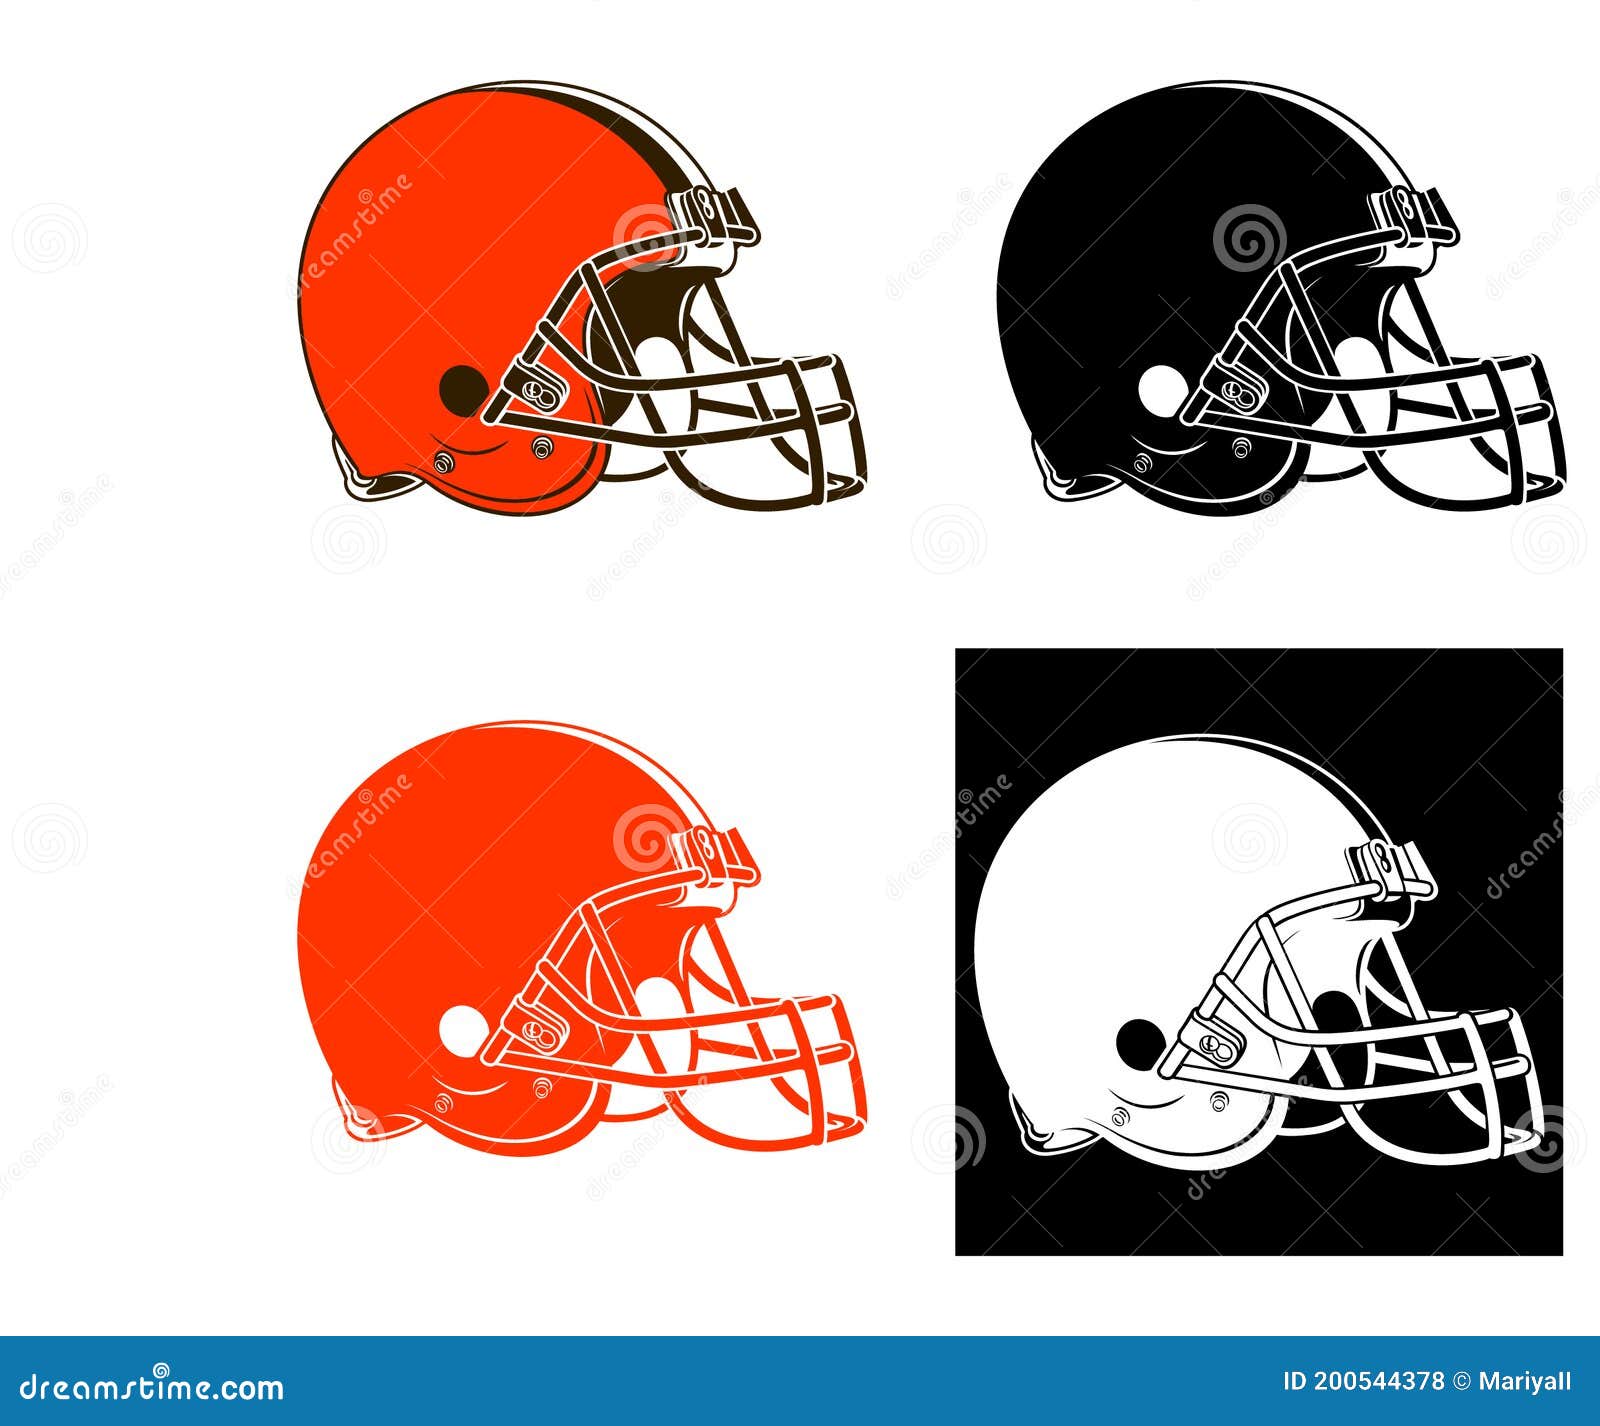 Cleveland Browns Logo Stock Illustrations – 14 Cleveland Browns